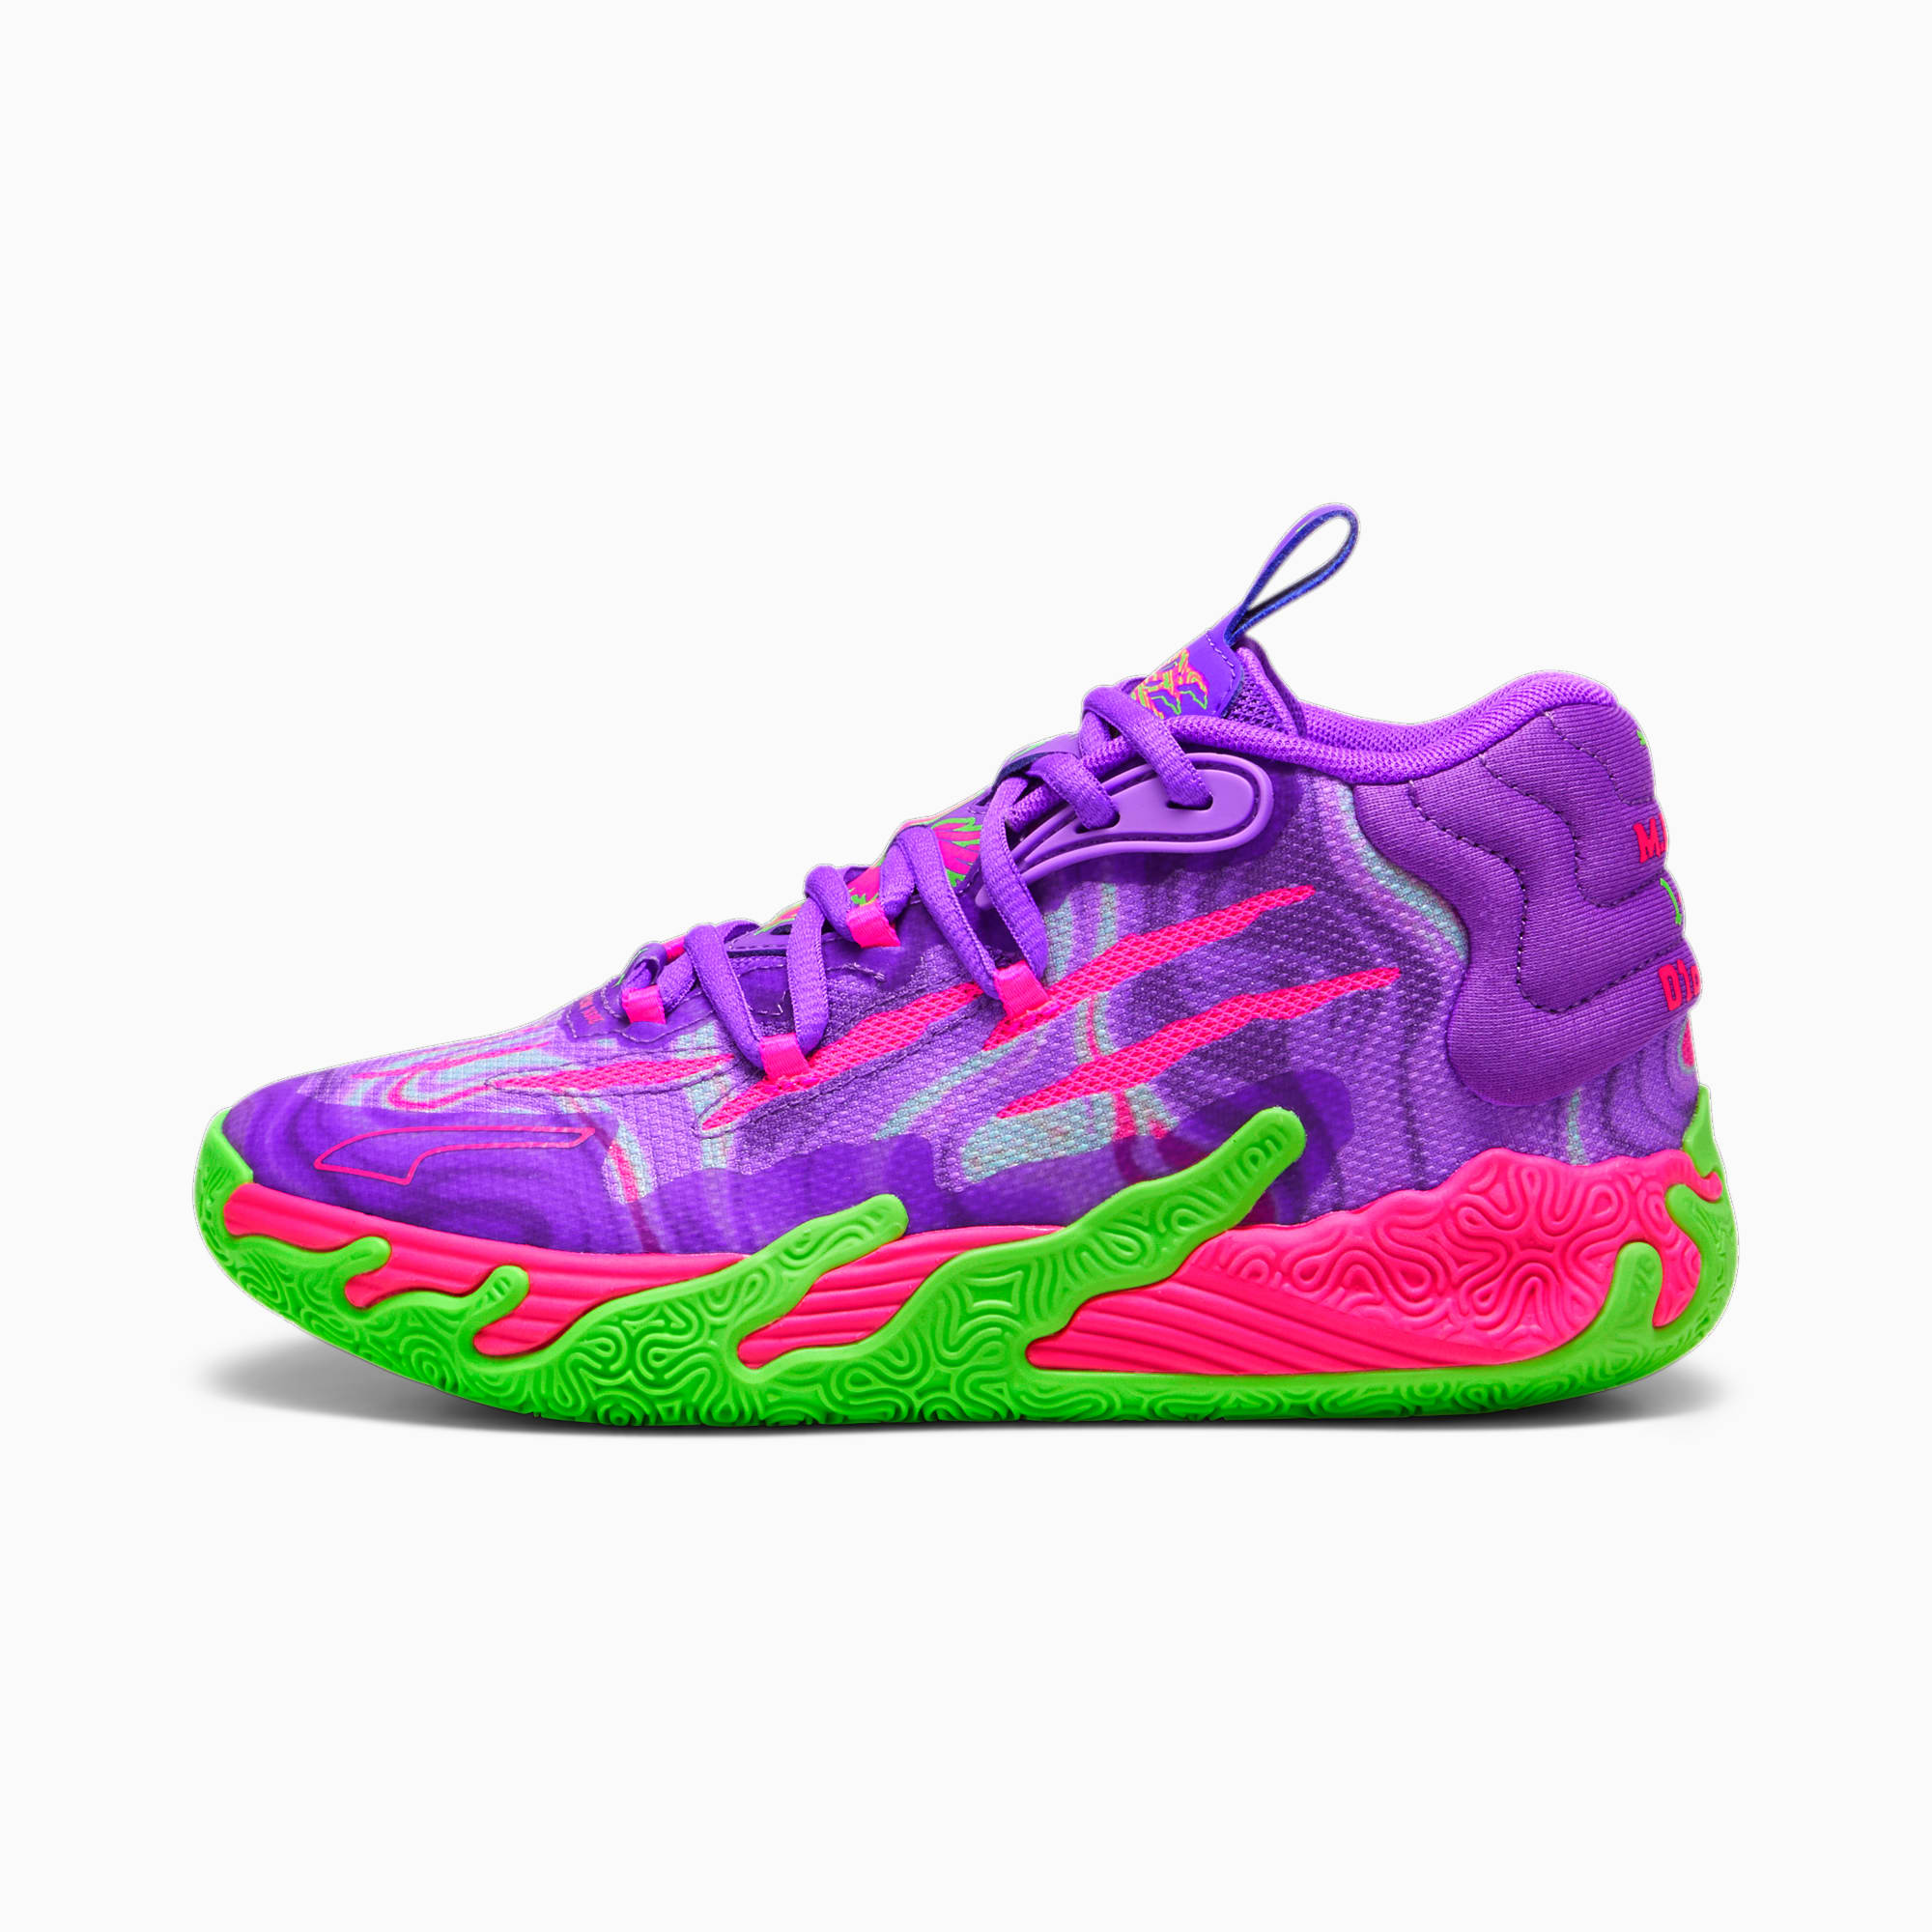 PUMA Mb.03 Toxic Youth Basketball Shoes, Purple Glimmer/Green Gecko, Size 35,5, Shoes